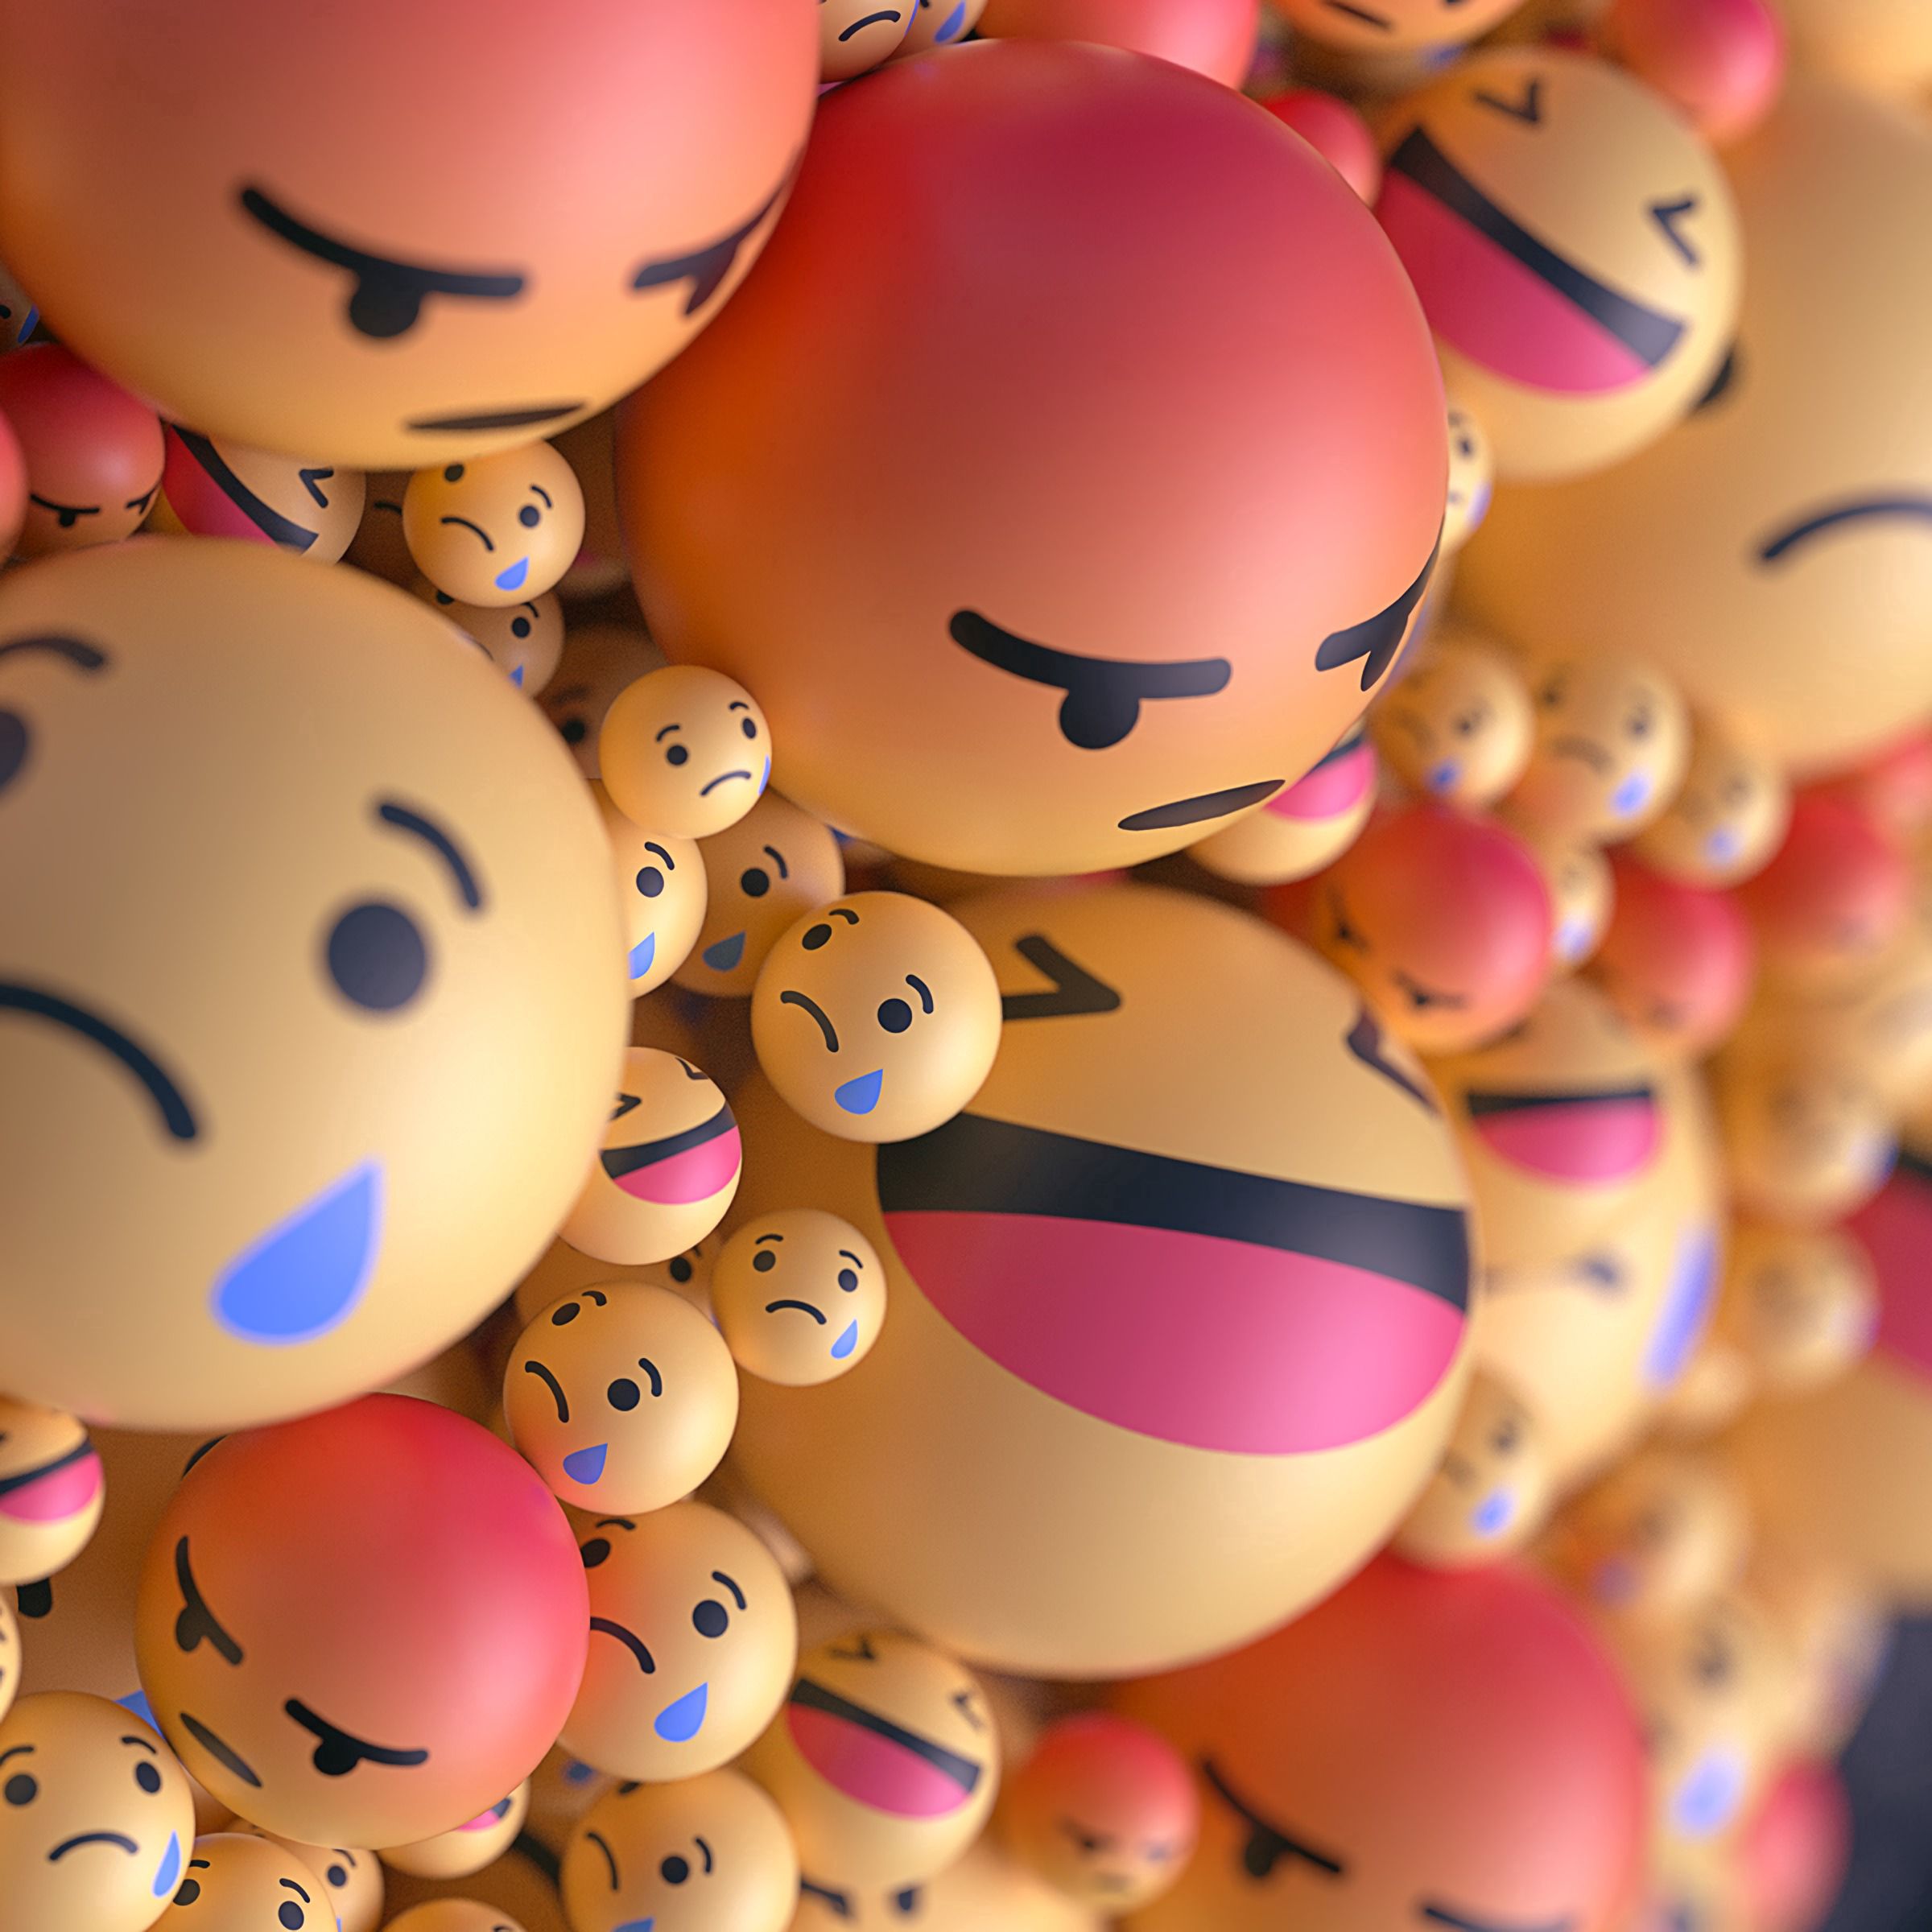 3d, smileys, balloons, emoticons, smiles, taw, smilies, emotions